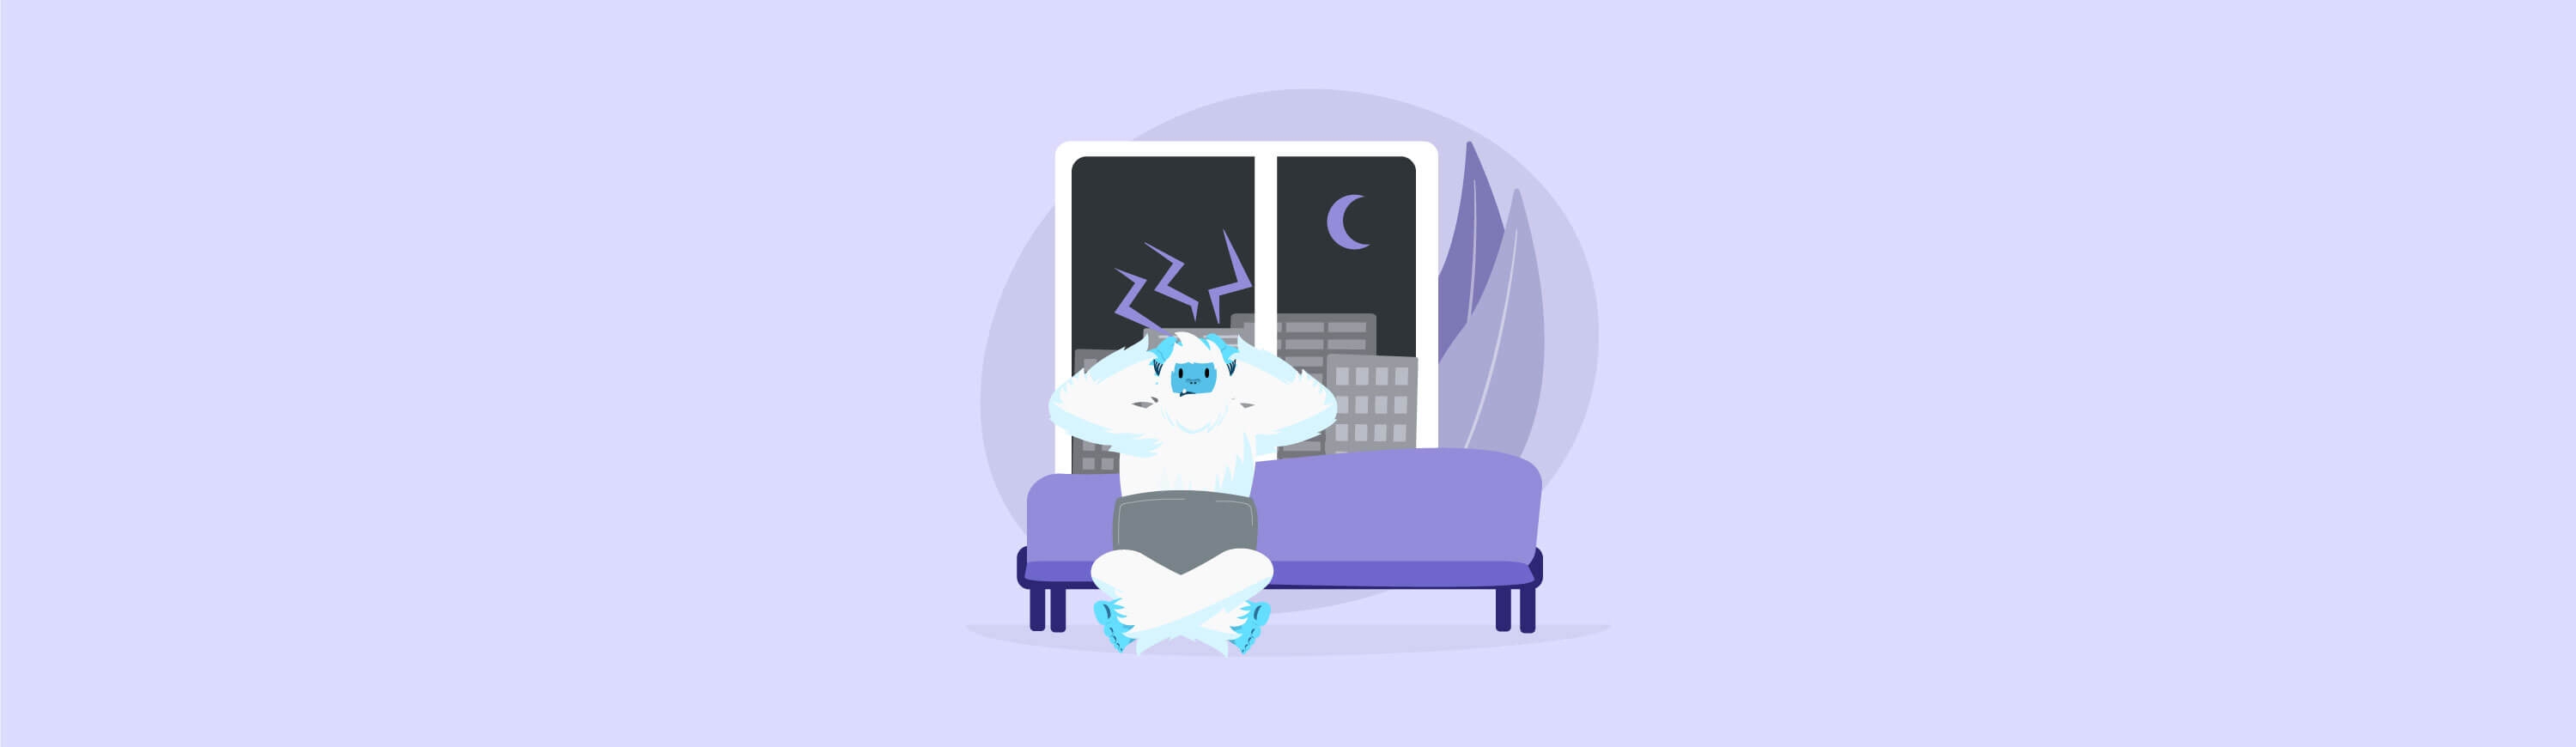 Illustration of Carl the Yeti sitting on a couch feeling anxious and distressed.